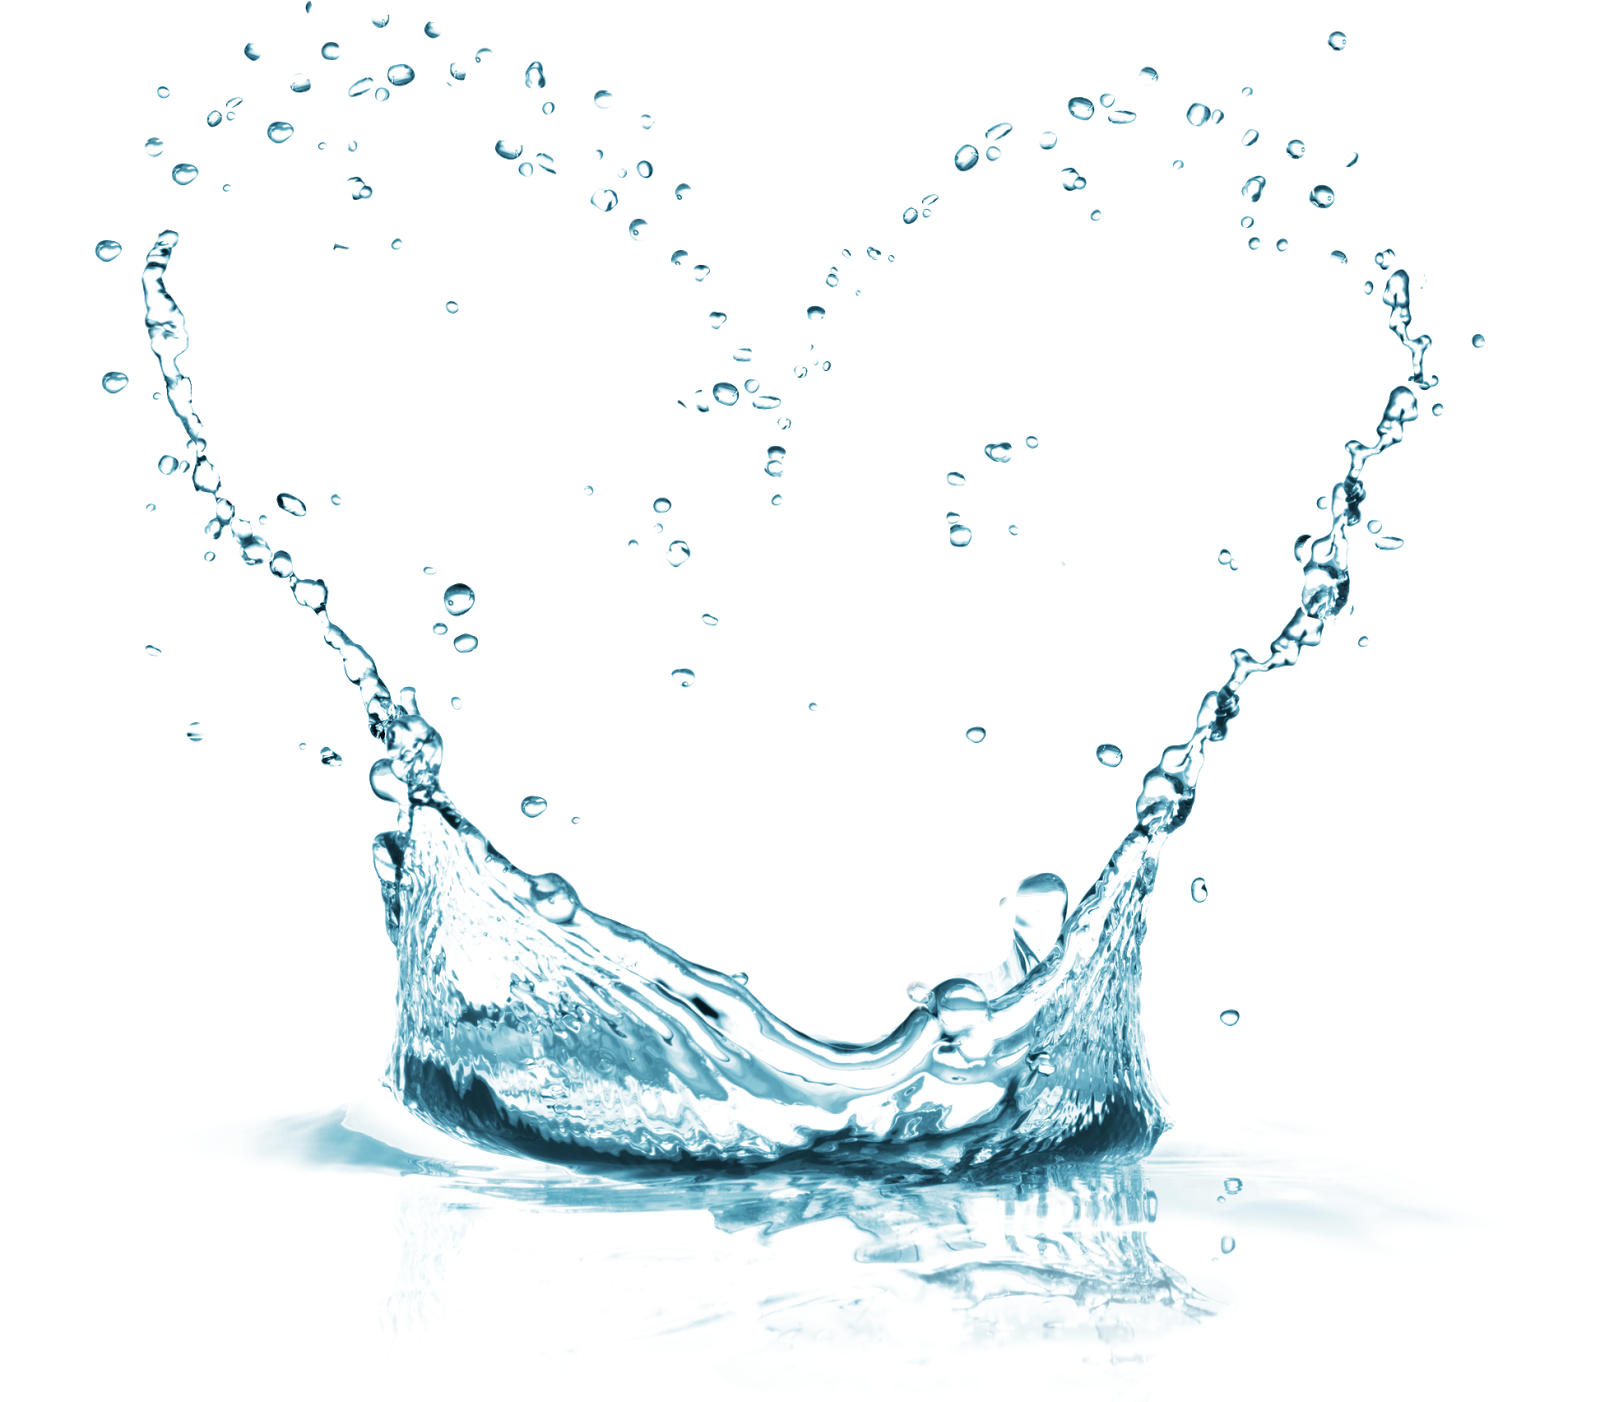 Transparent water splahes with heart symbol #9552